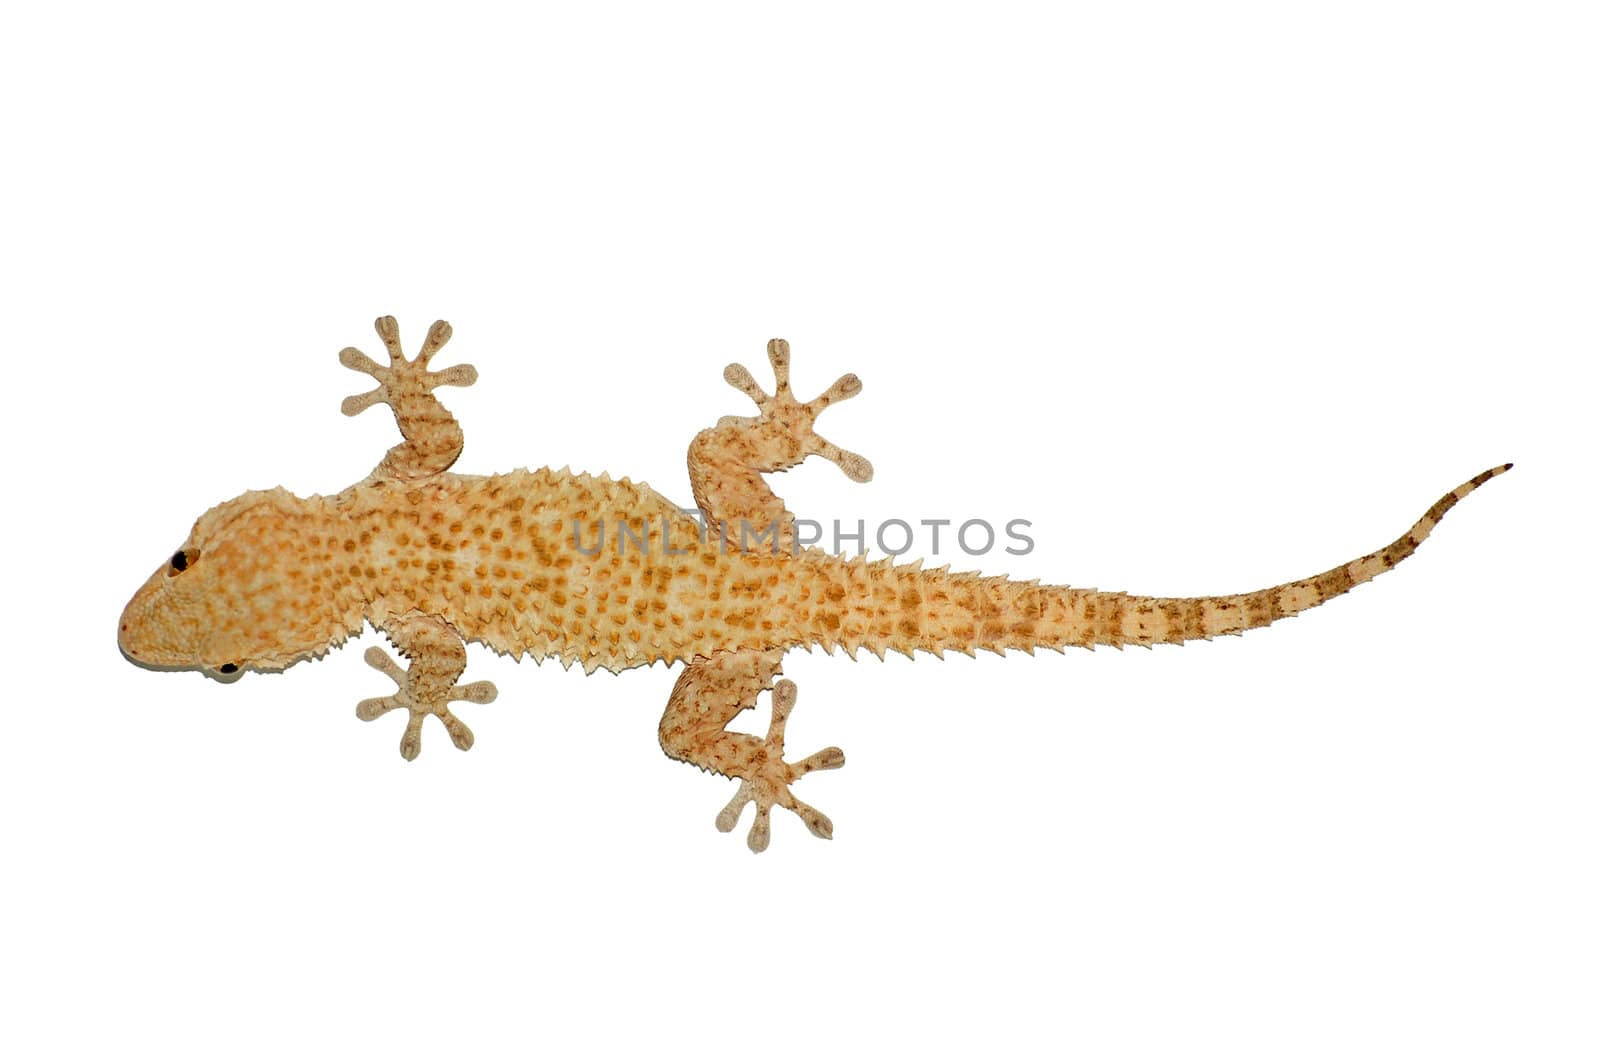 Small gecko reptile lizard against a white background.